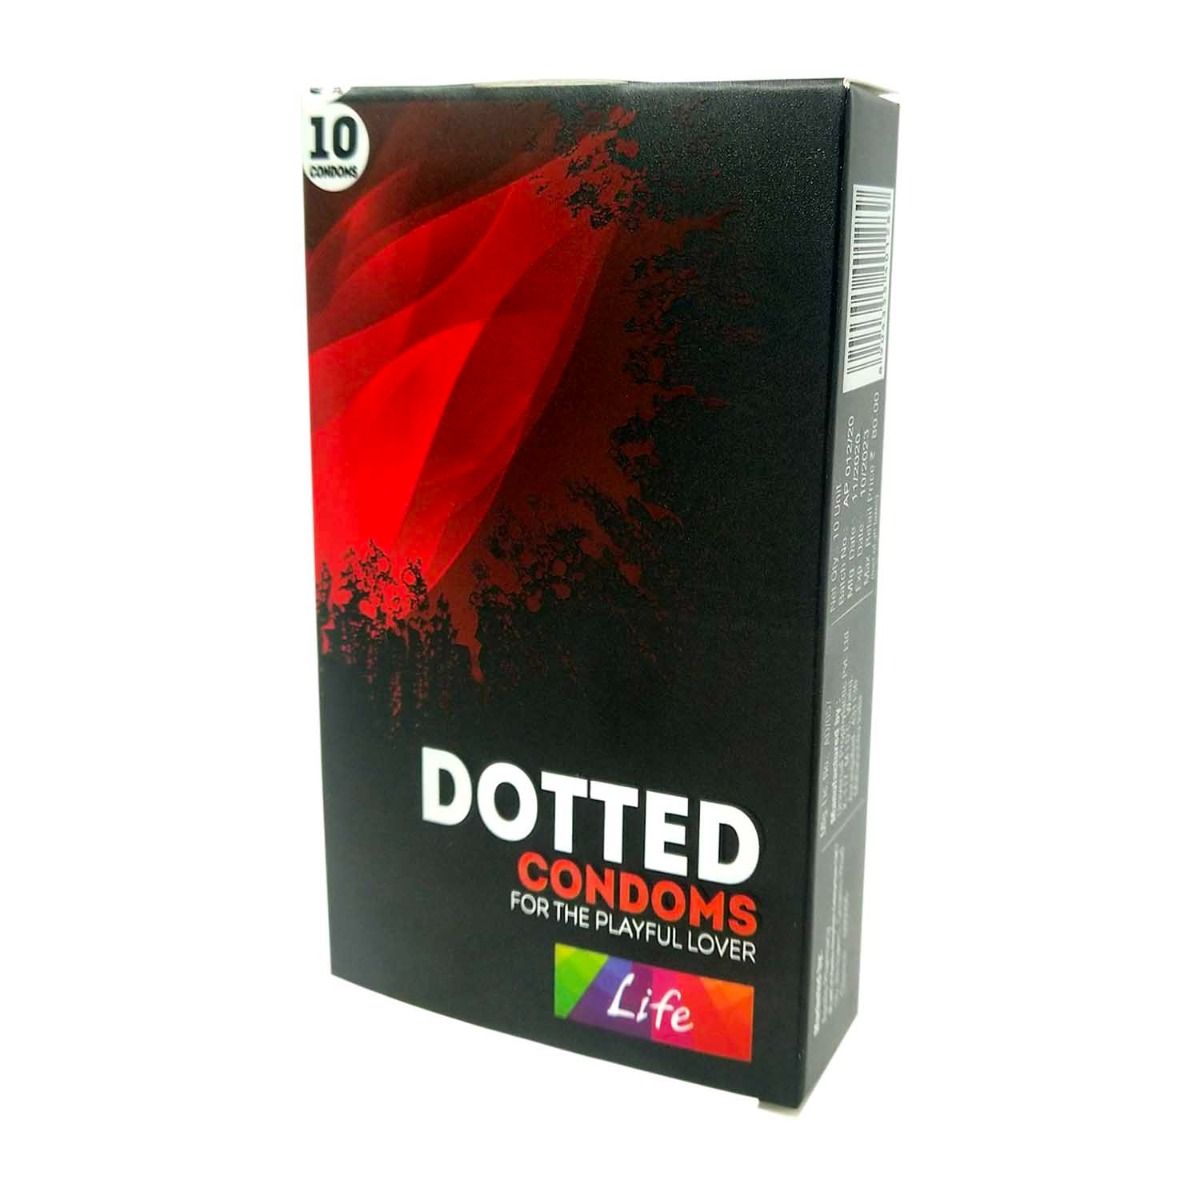 Buy Apollo Life Dotted Condoms, 10 Count Online